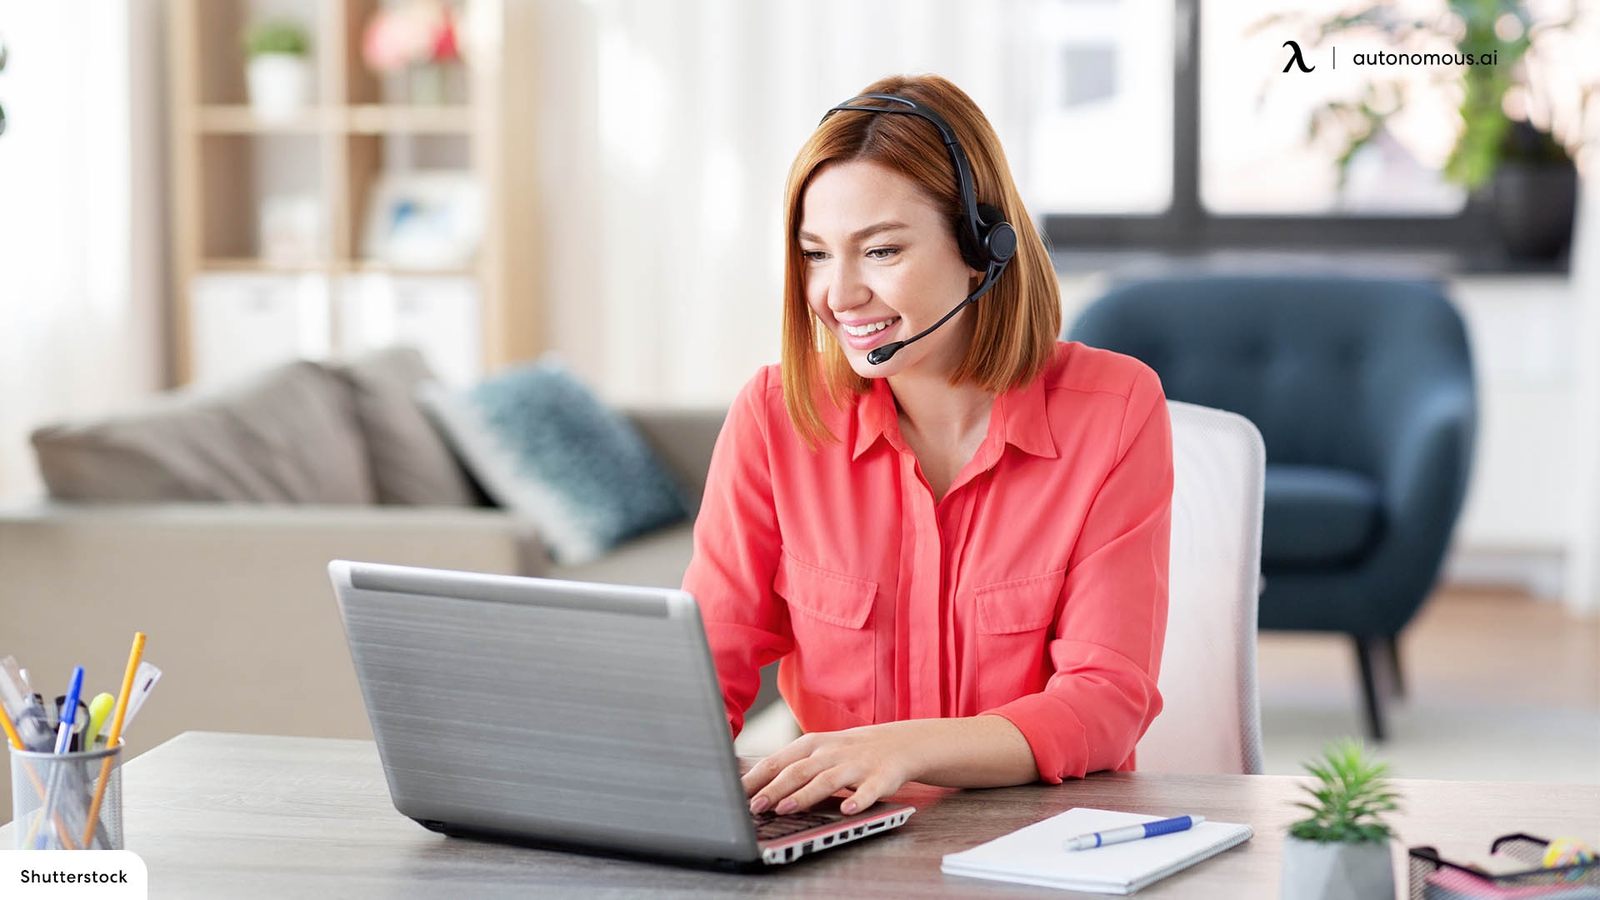 Top 10 Headsets Choices for You When Working from Home